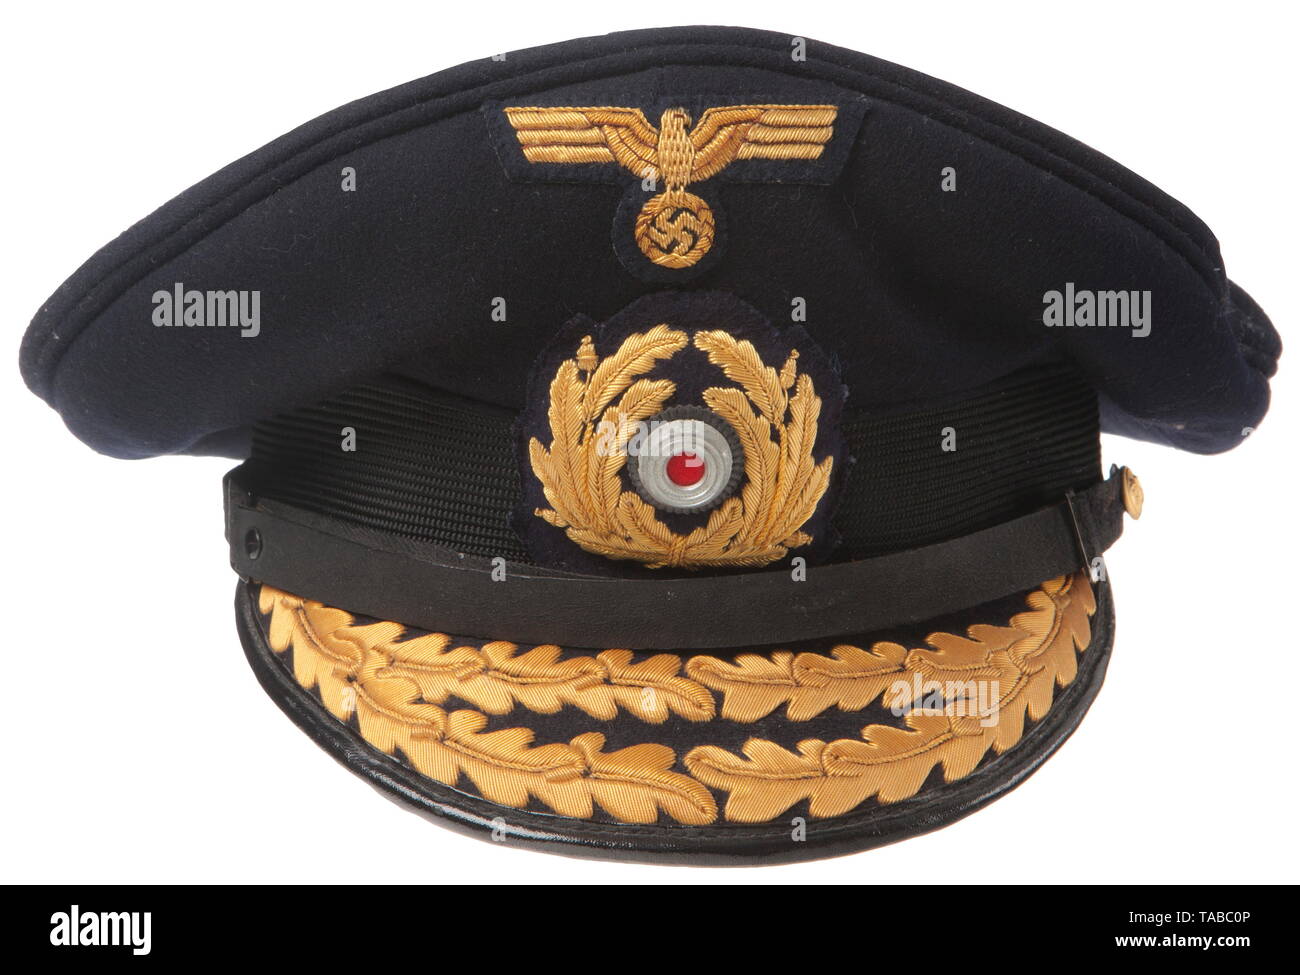 A Kriegsmarine visor cap for commodores and admirals Fine blue doeskin top with a horizontally ribbed black mohair centre band, gold cellon embroidered insignia, black vulcan fiber visor with applied double row of gold cellon embroidered oakleaves. Black patent leather chin strap secured by two small fire gilt buttons with an embossed fouled anchor and twisted rope design. Blue satin lining with diamond shaped moisture shield imprinted 'Erel Sonderklasse'. Complete with tan leather sweatband. USA-lot, see page 4. historic, historical, navy, naval forces, military, militaria, Editorial-Use-Only Stock Photo